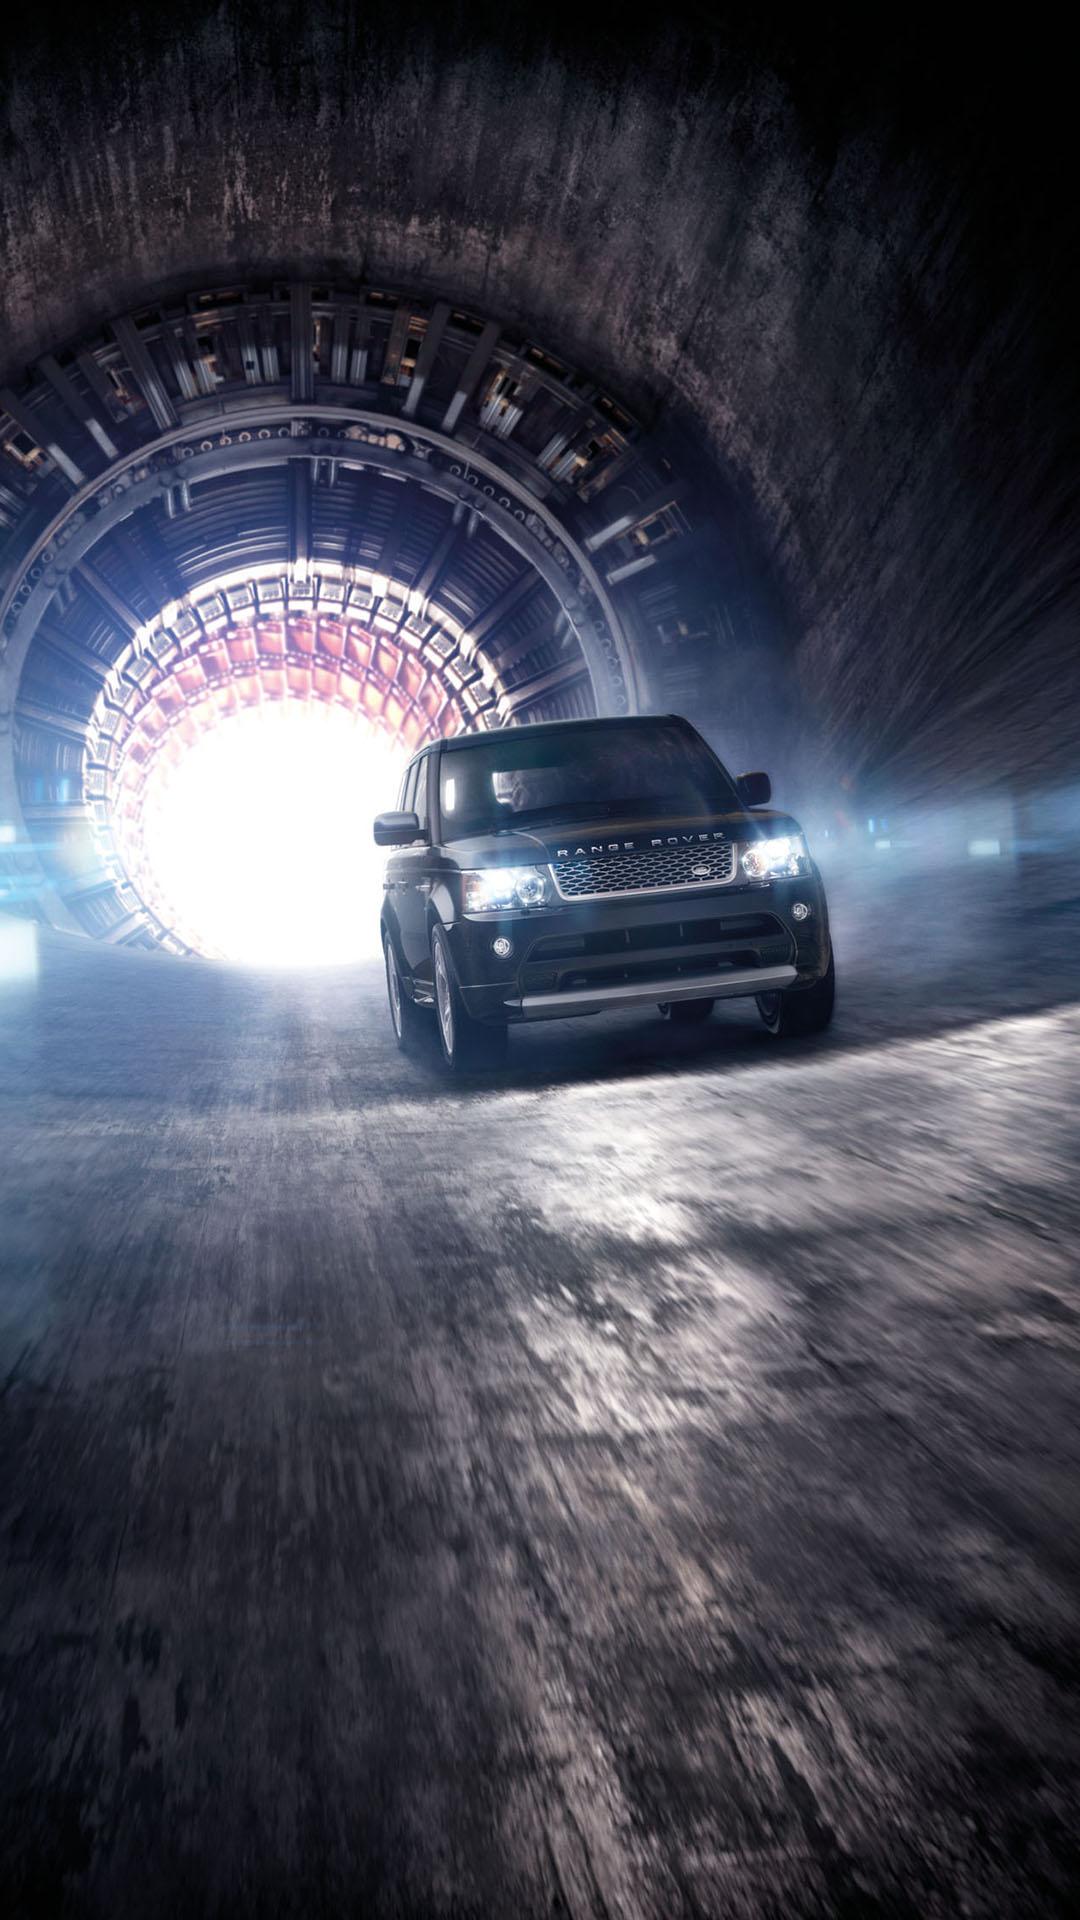 Range Rover Sport htc one wallpaper, free and easy